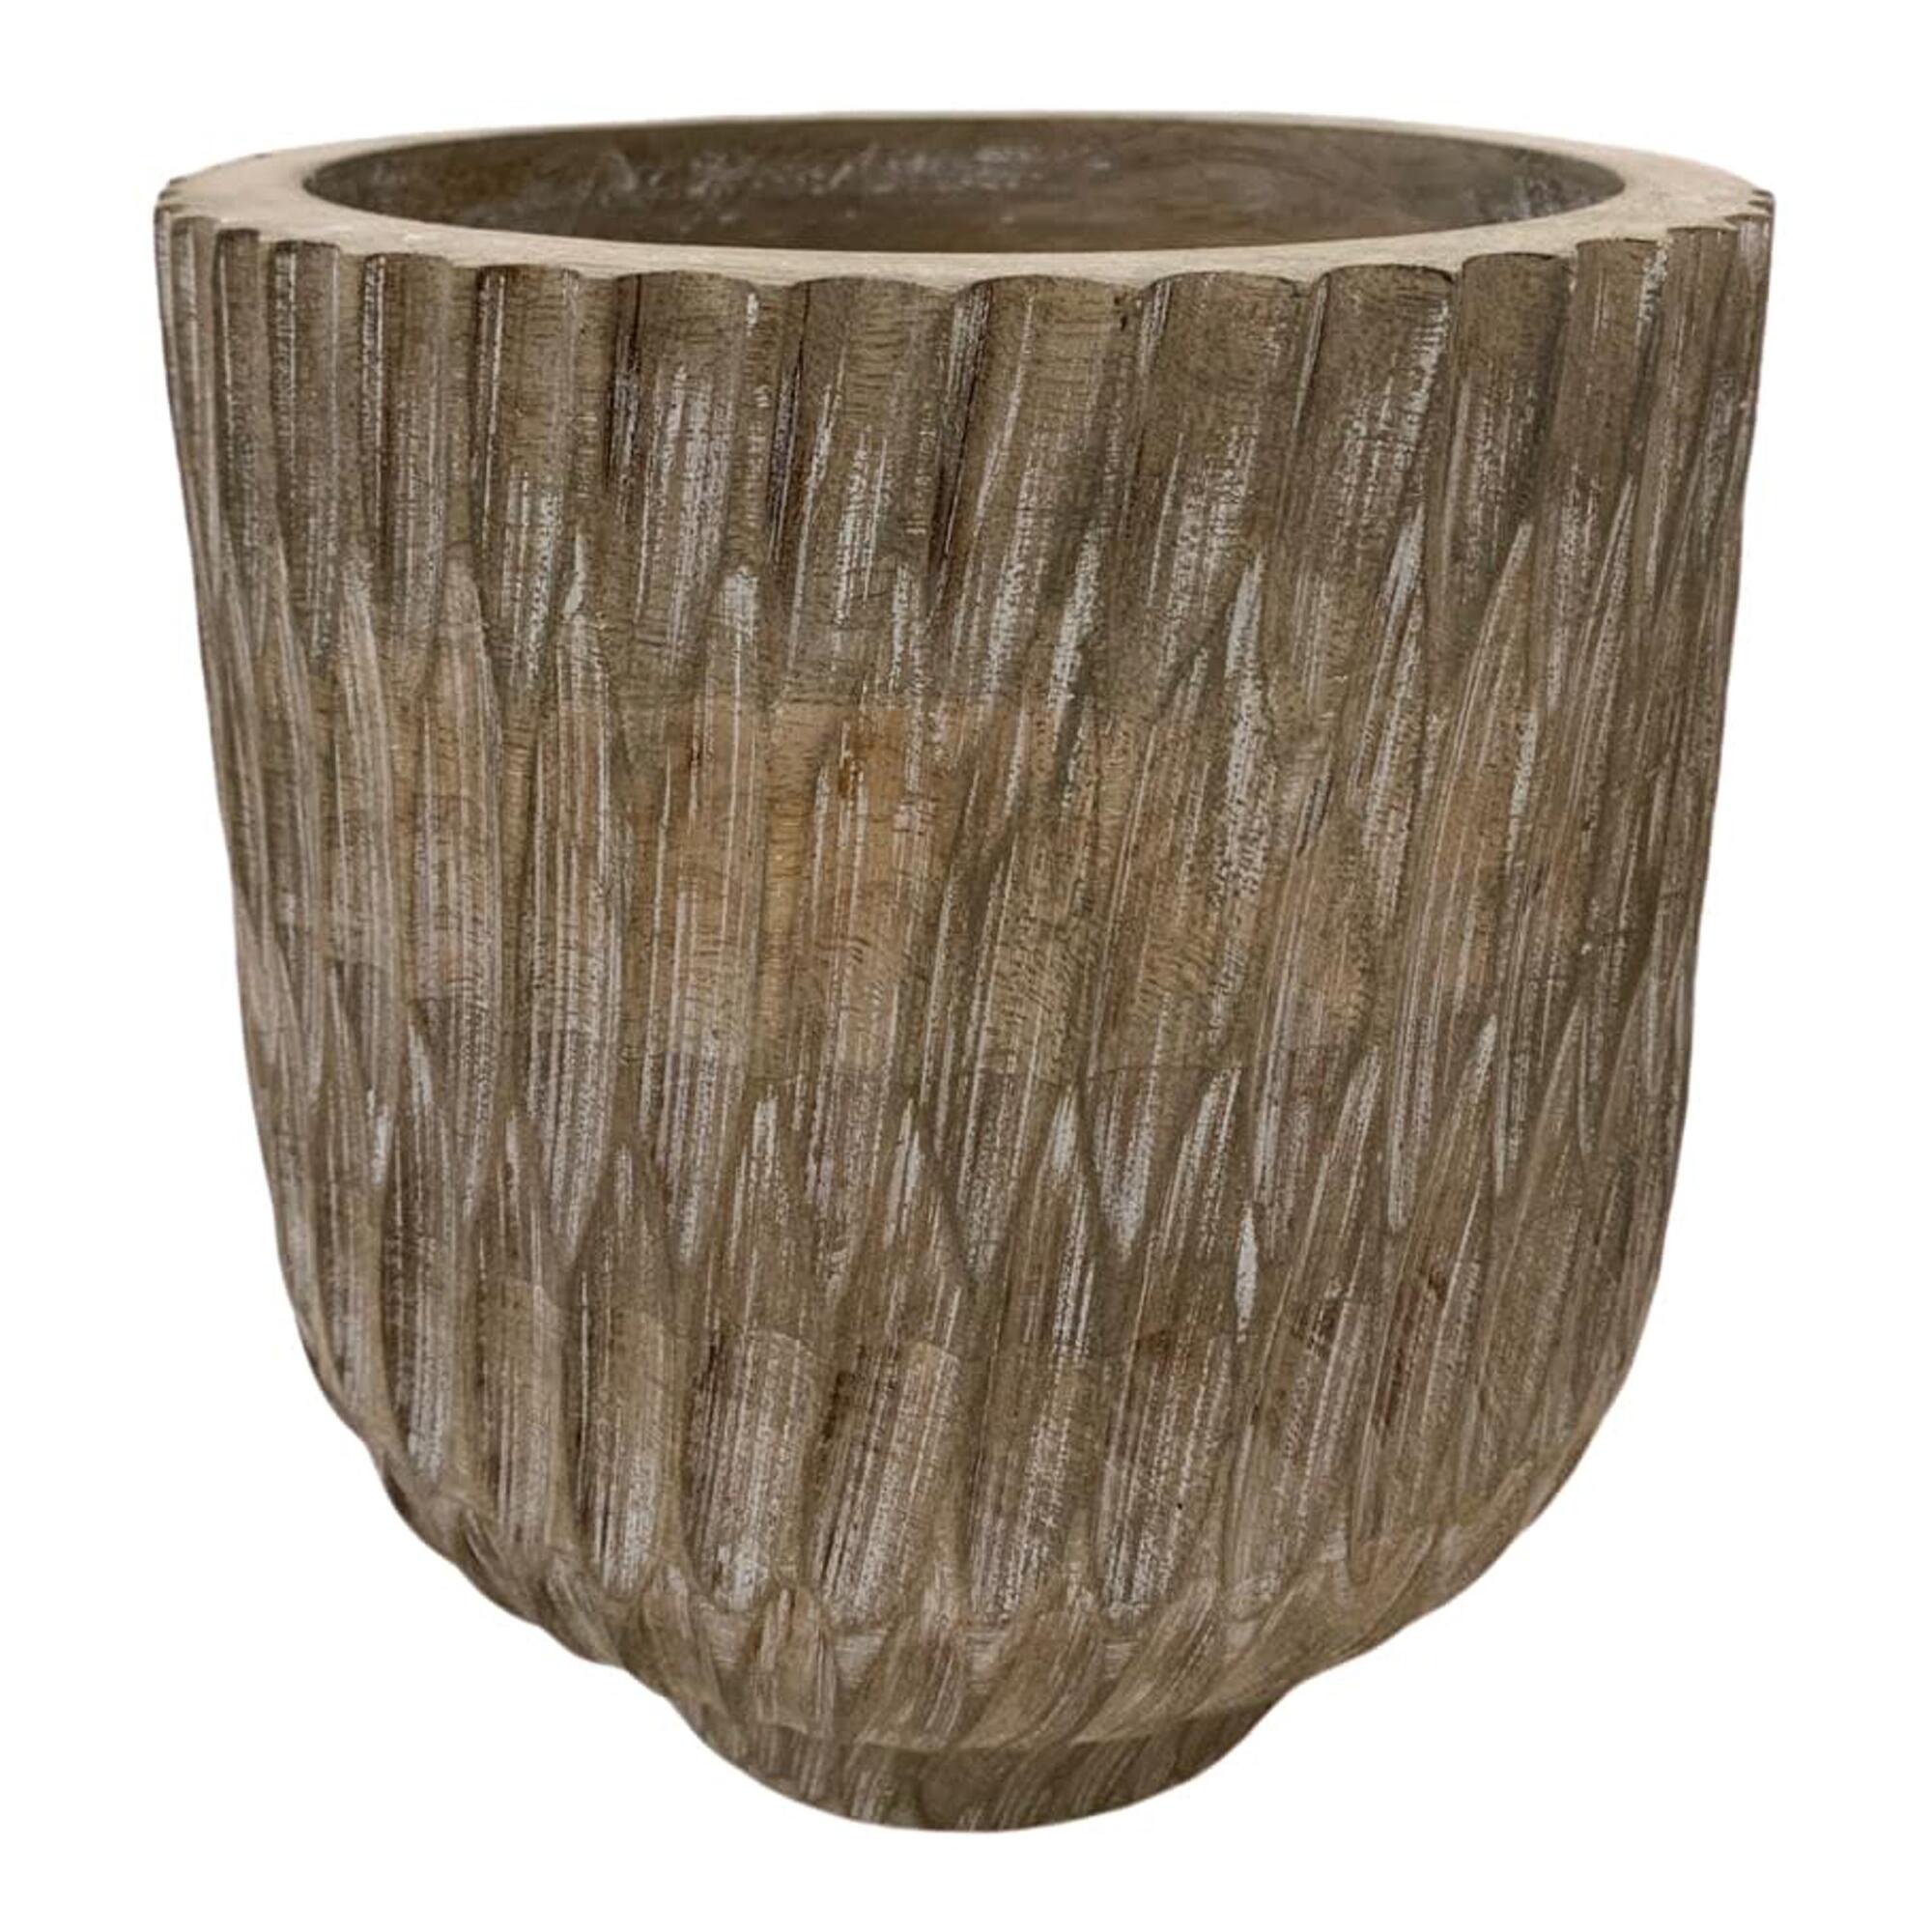 Natural Carved Wood Planter by World Market